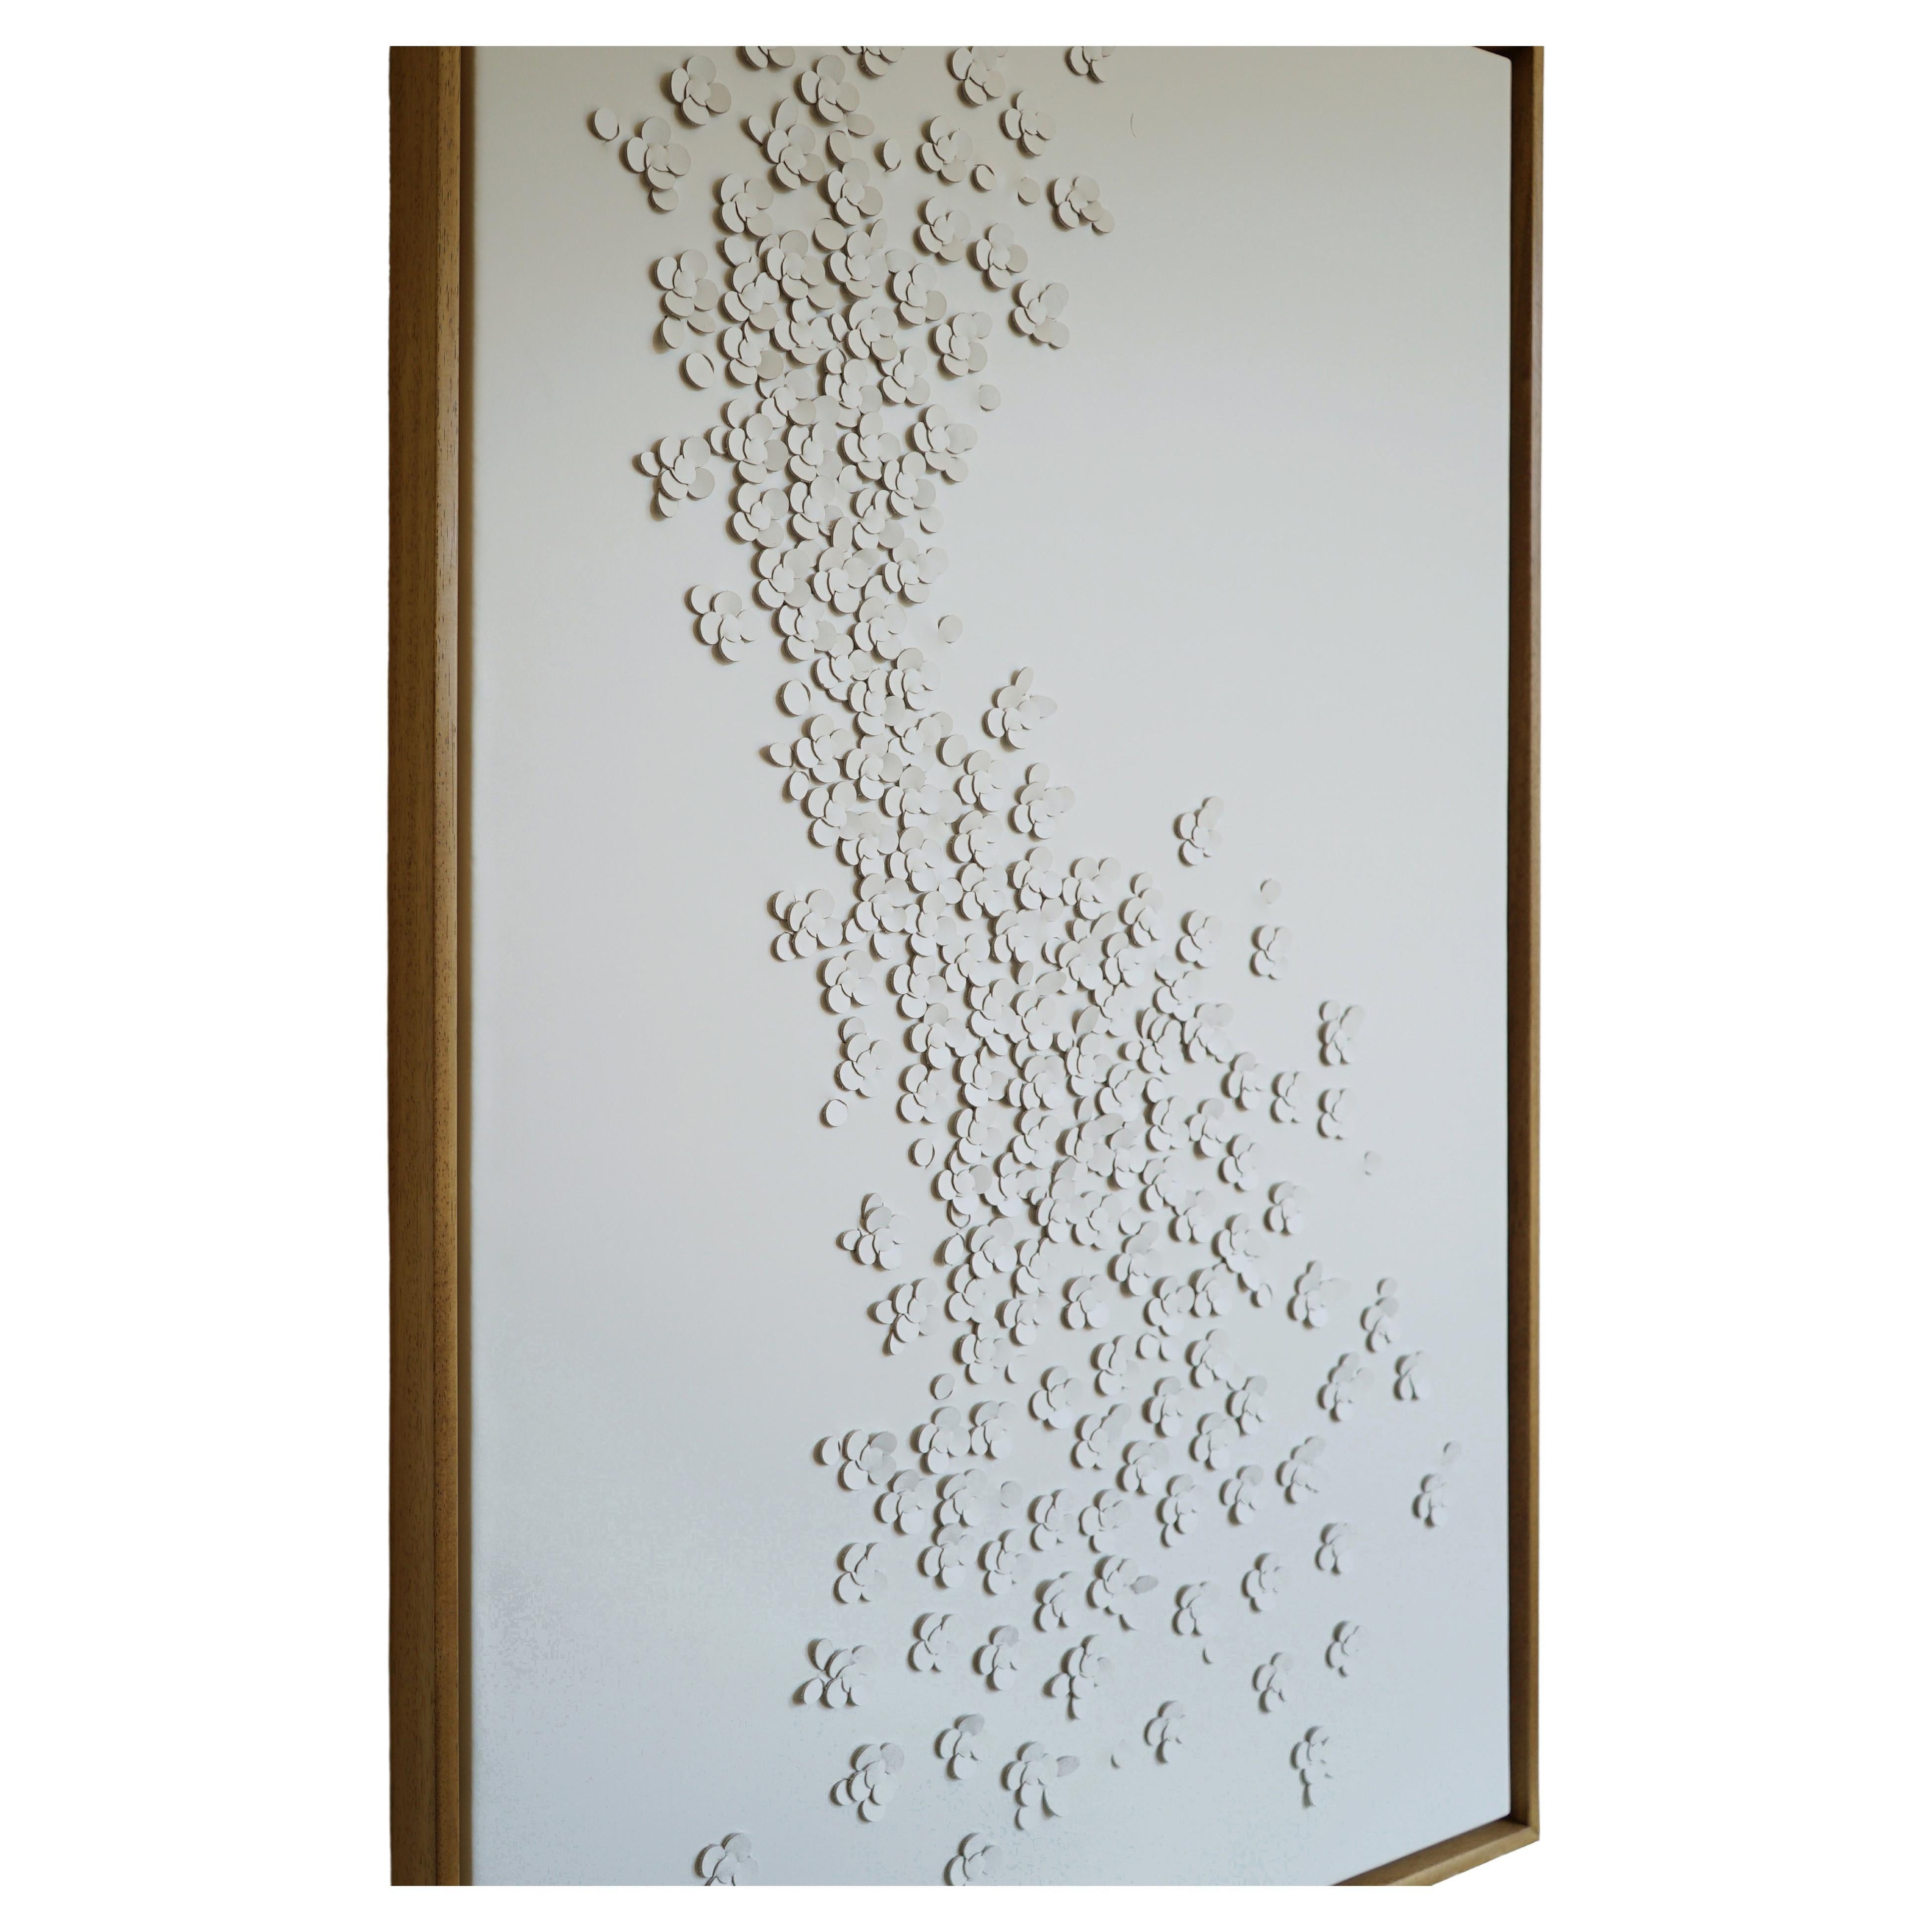 Blossom: A Piece of 3D Sculptural White Leather Wall Art.